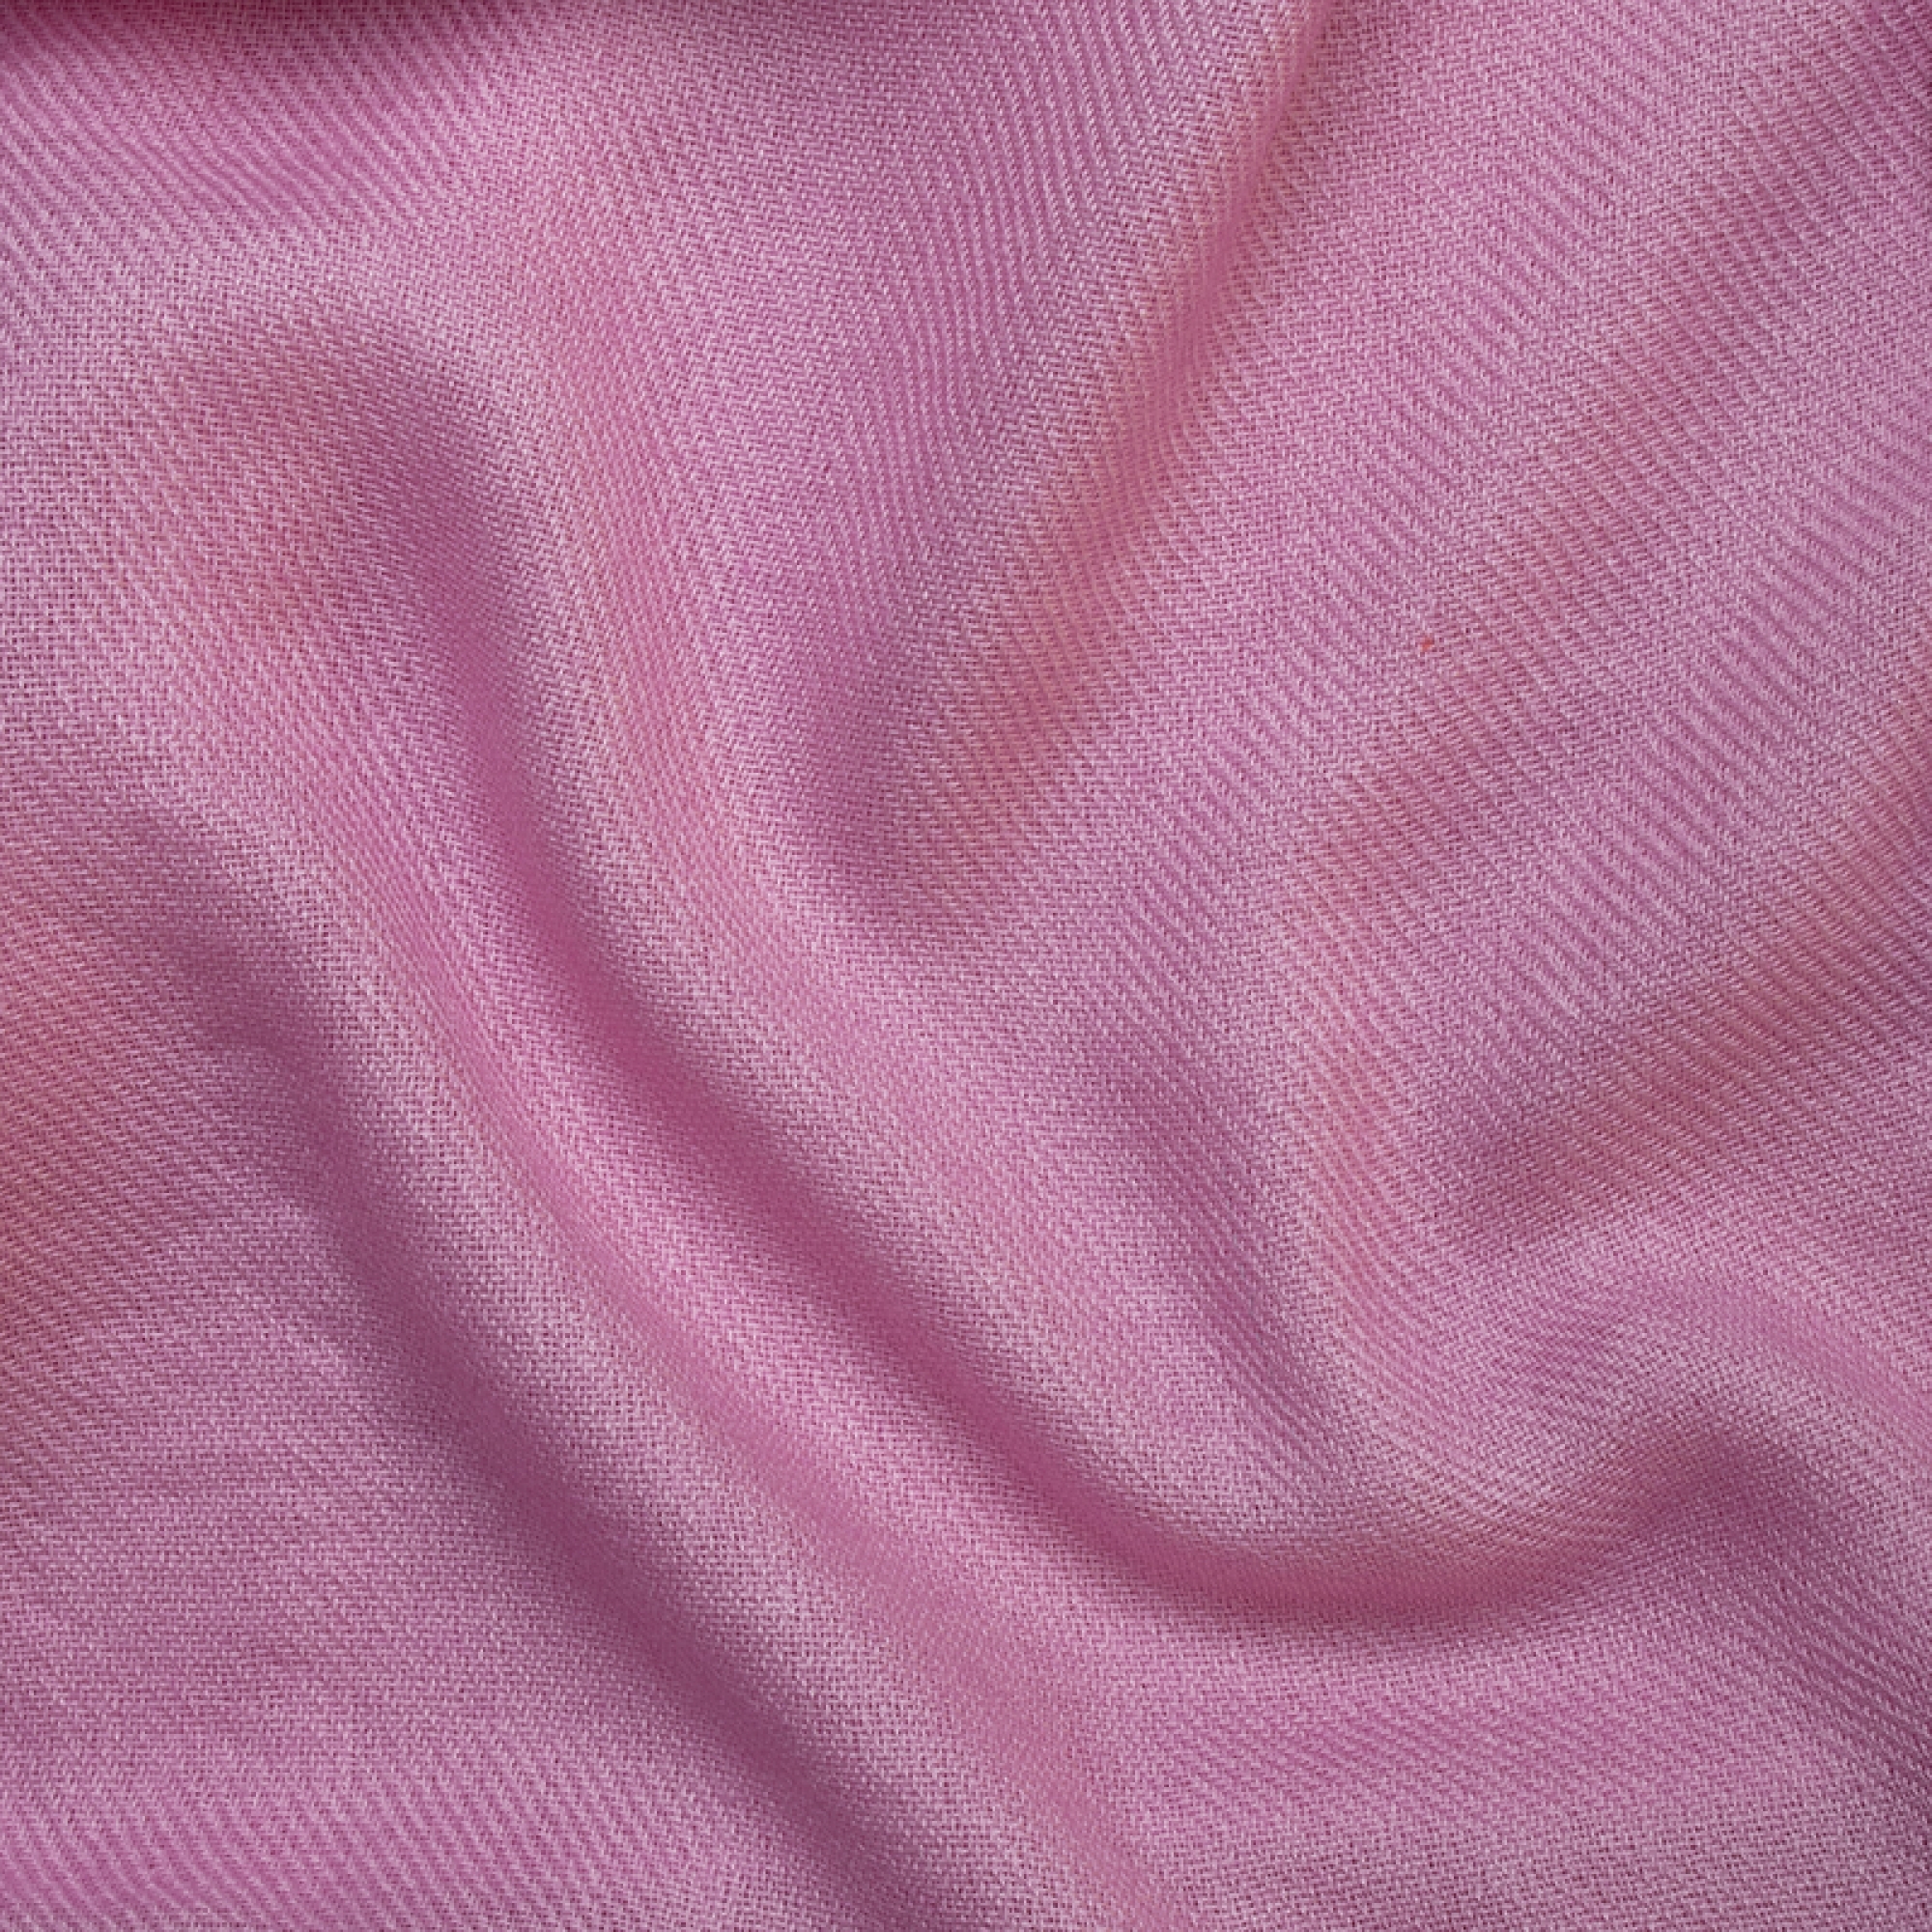 Cashmere accessories cocooning toodoo plain m 180 x 220 pink lavender 180 x 220 cm